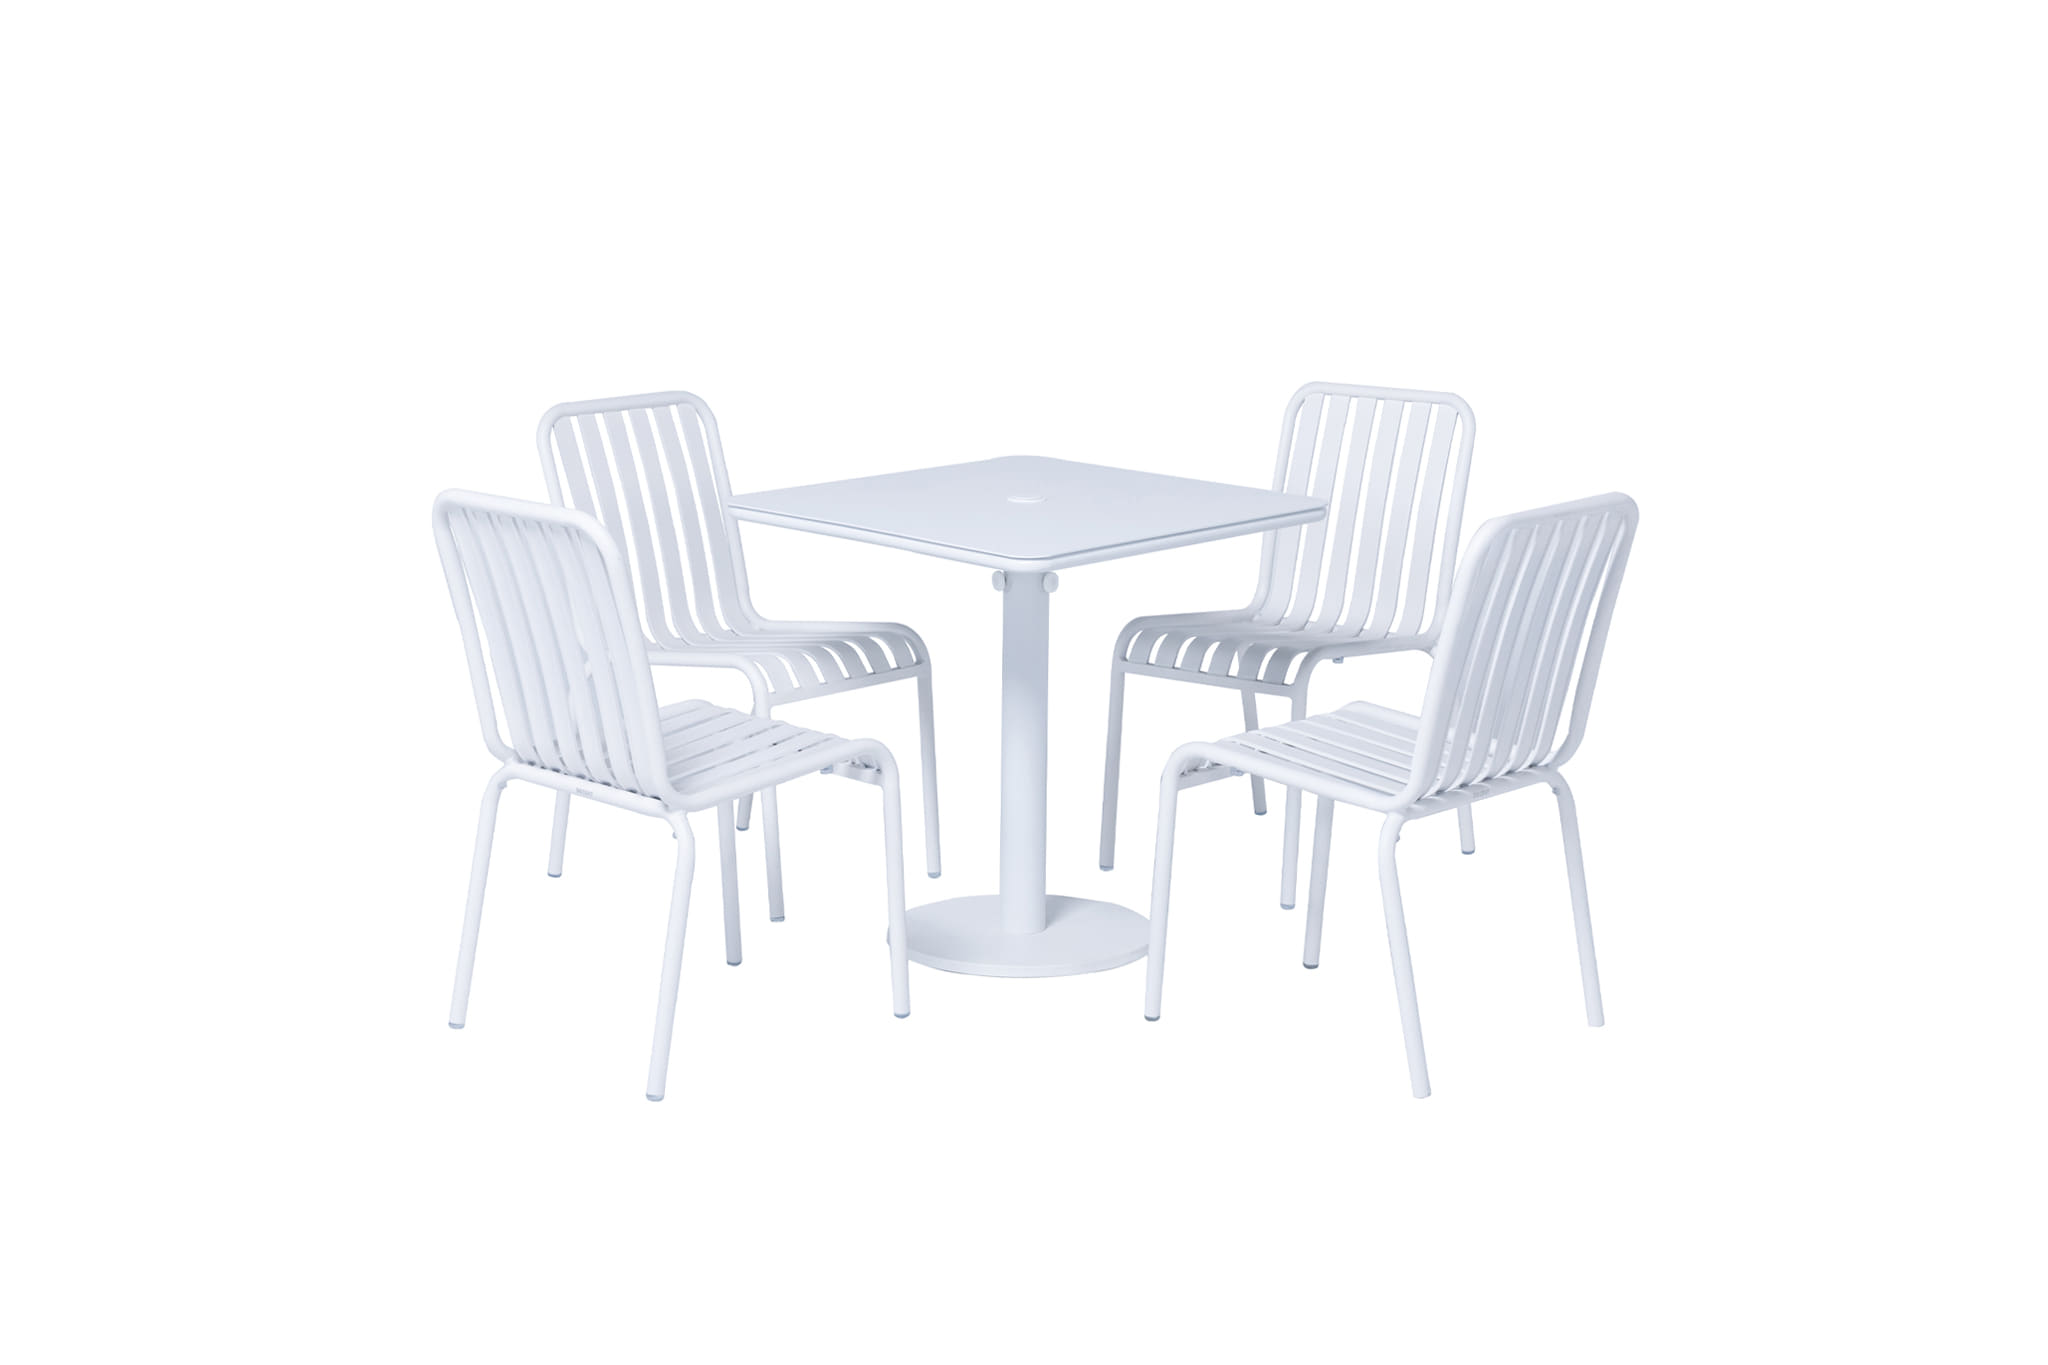 Docent Net_Docent Net Square Dining Set